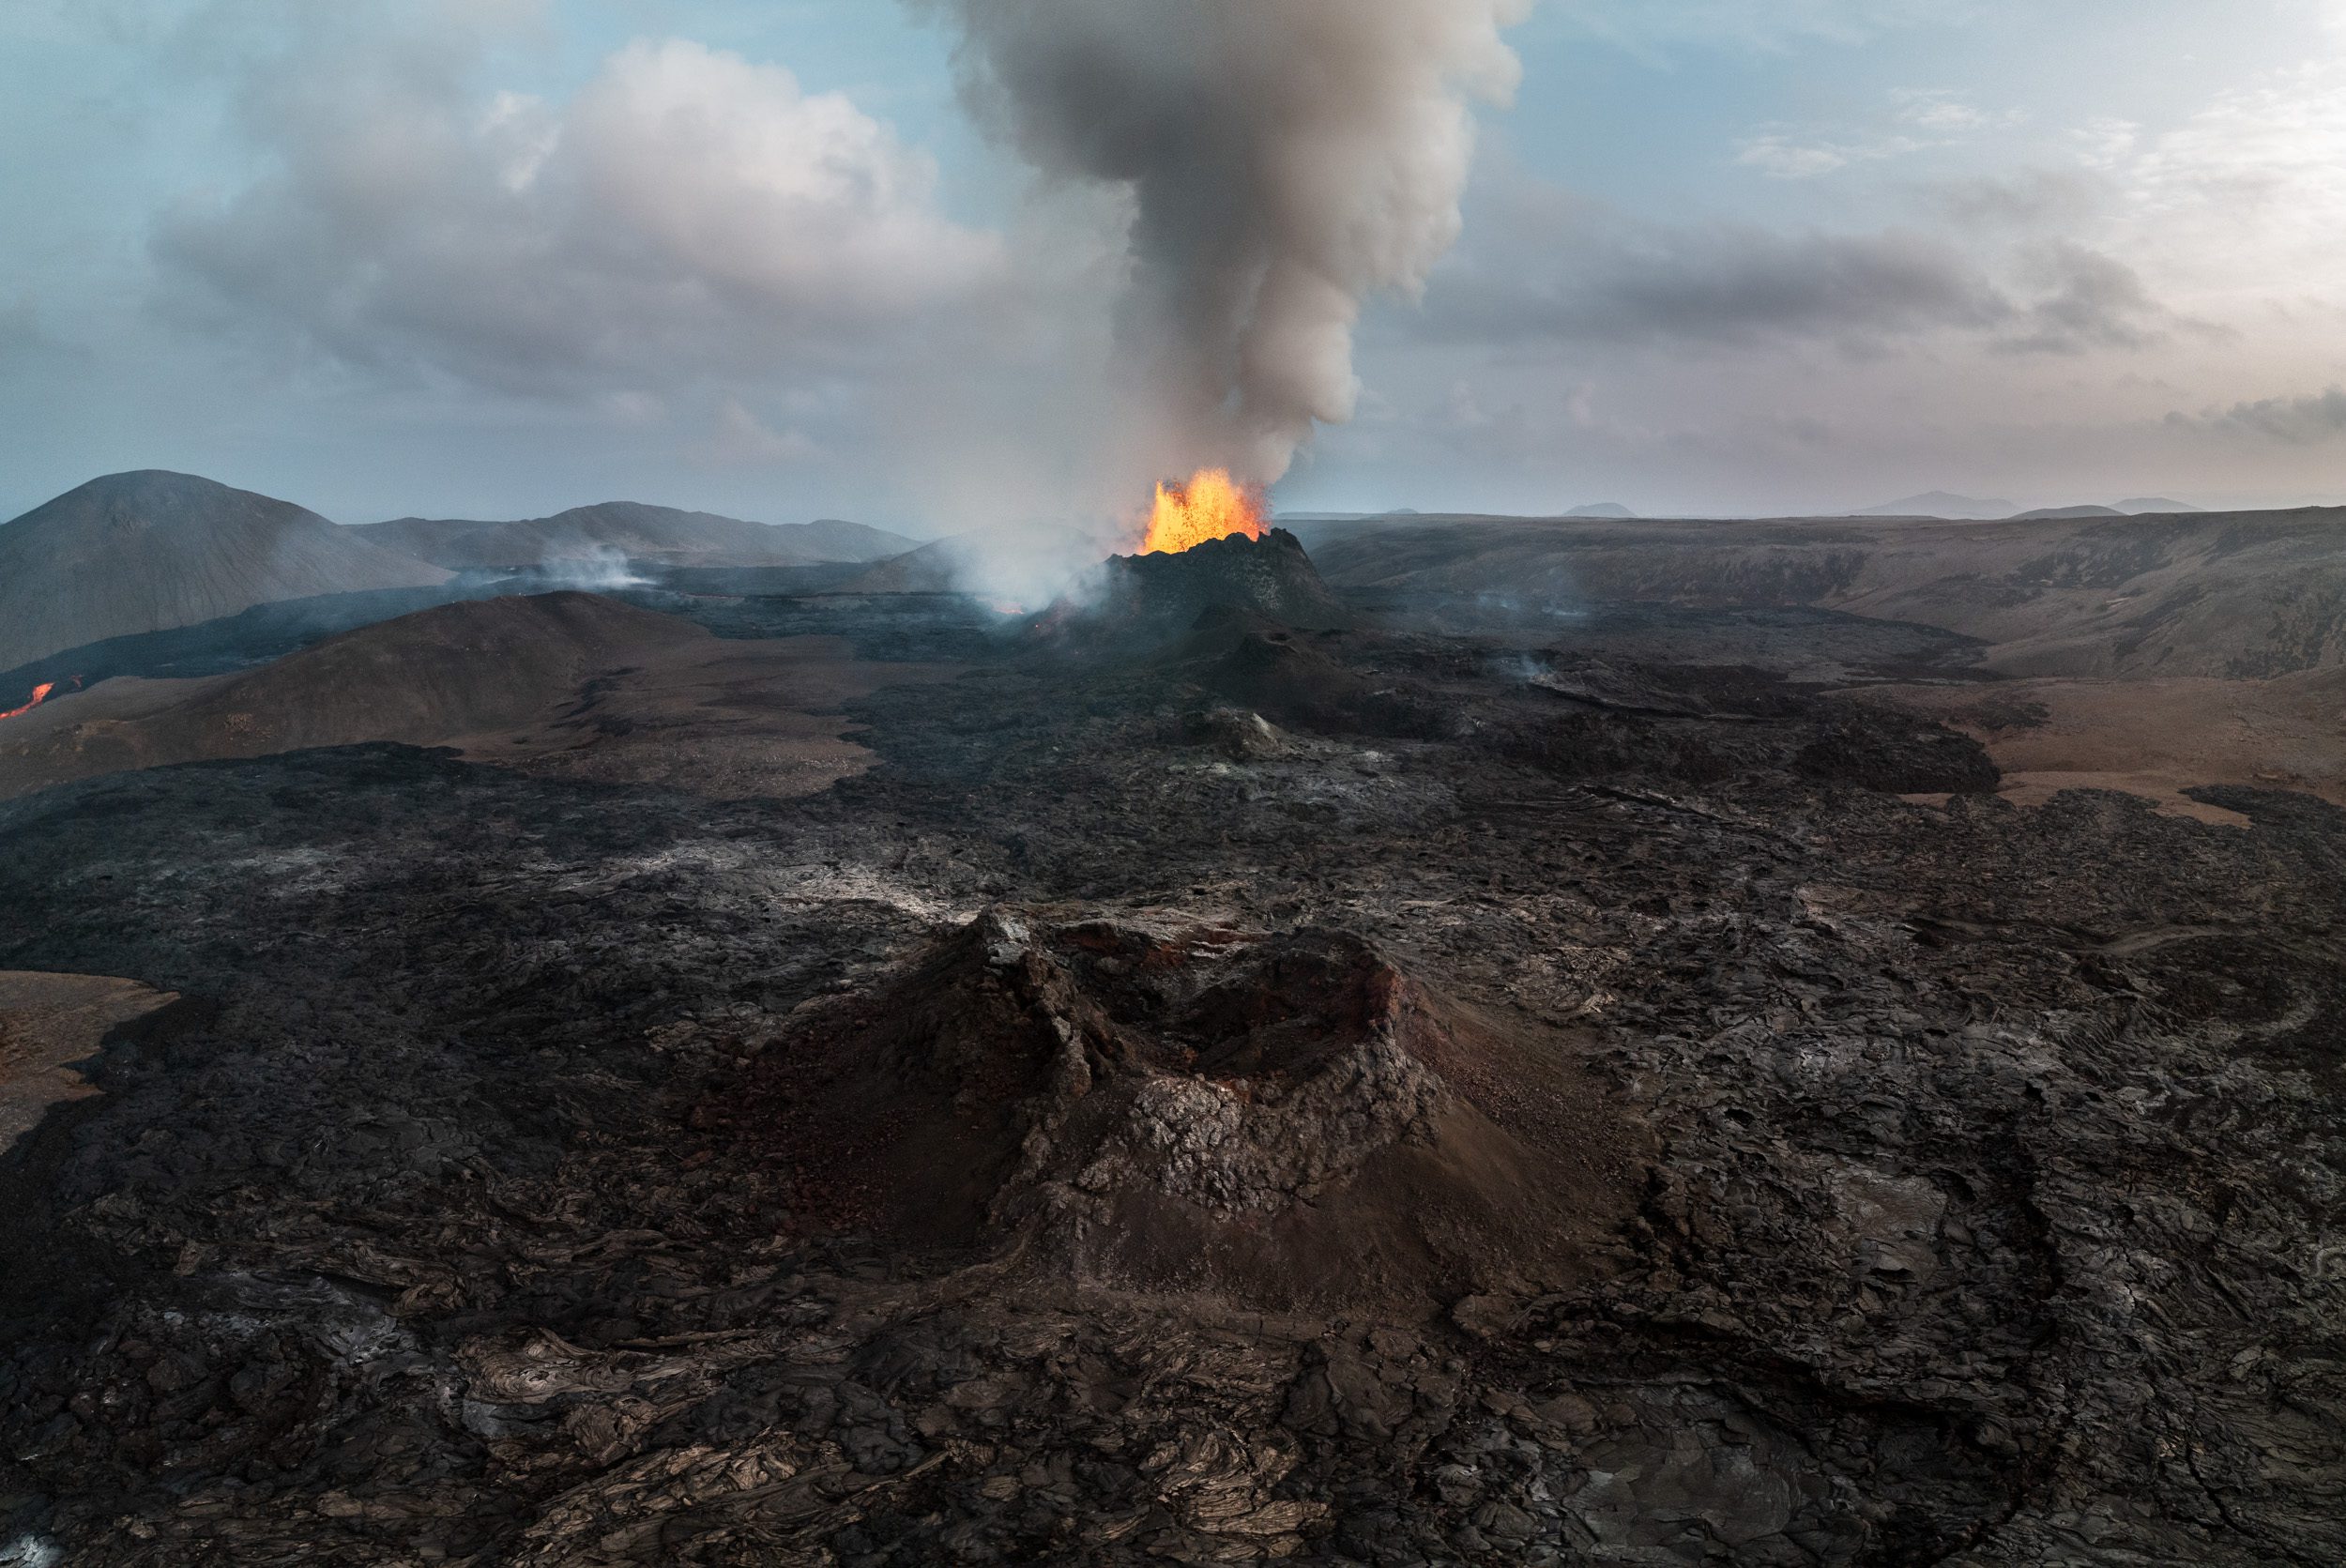 My Photographic Journey of a Volcanic 10 Weeks